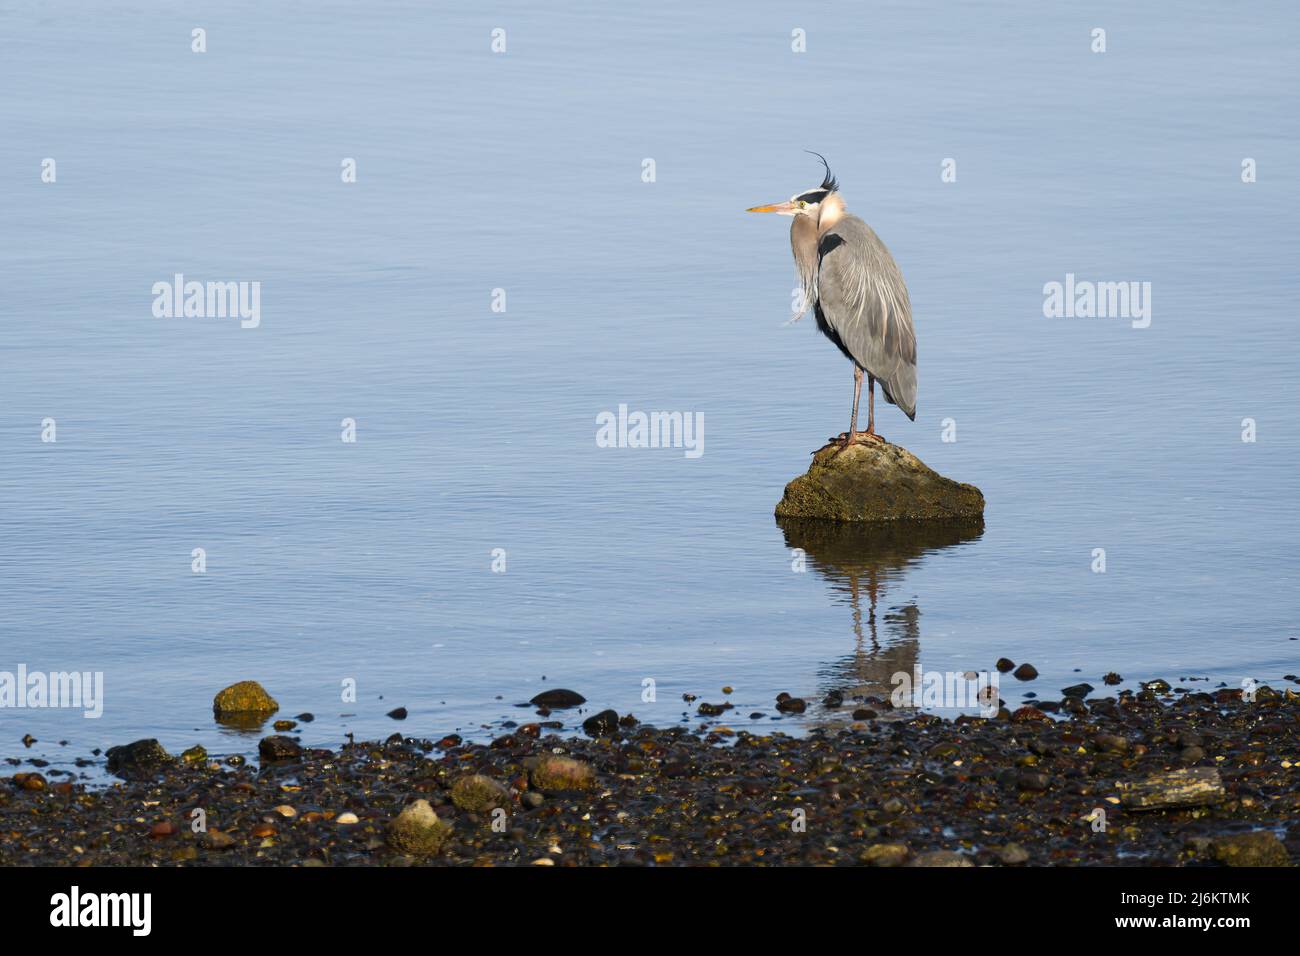 Great blue heron standing on a rock on edge of the water with wind blowing head feathers Stock Photo